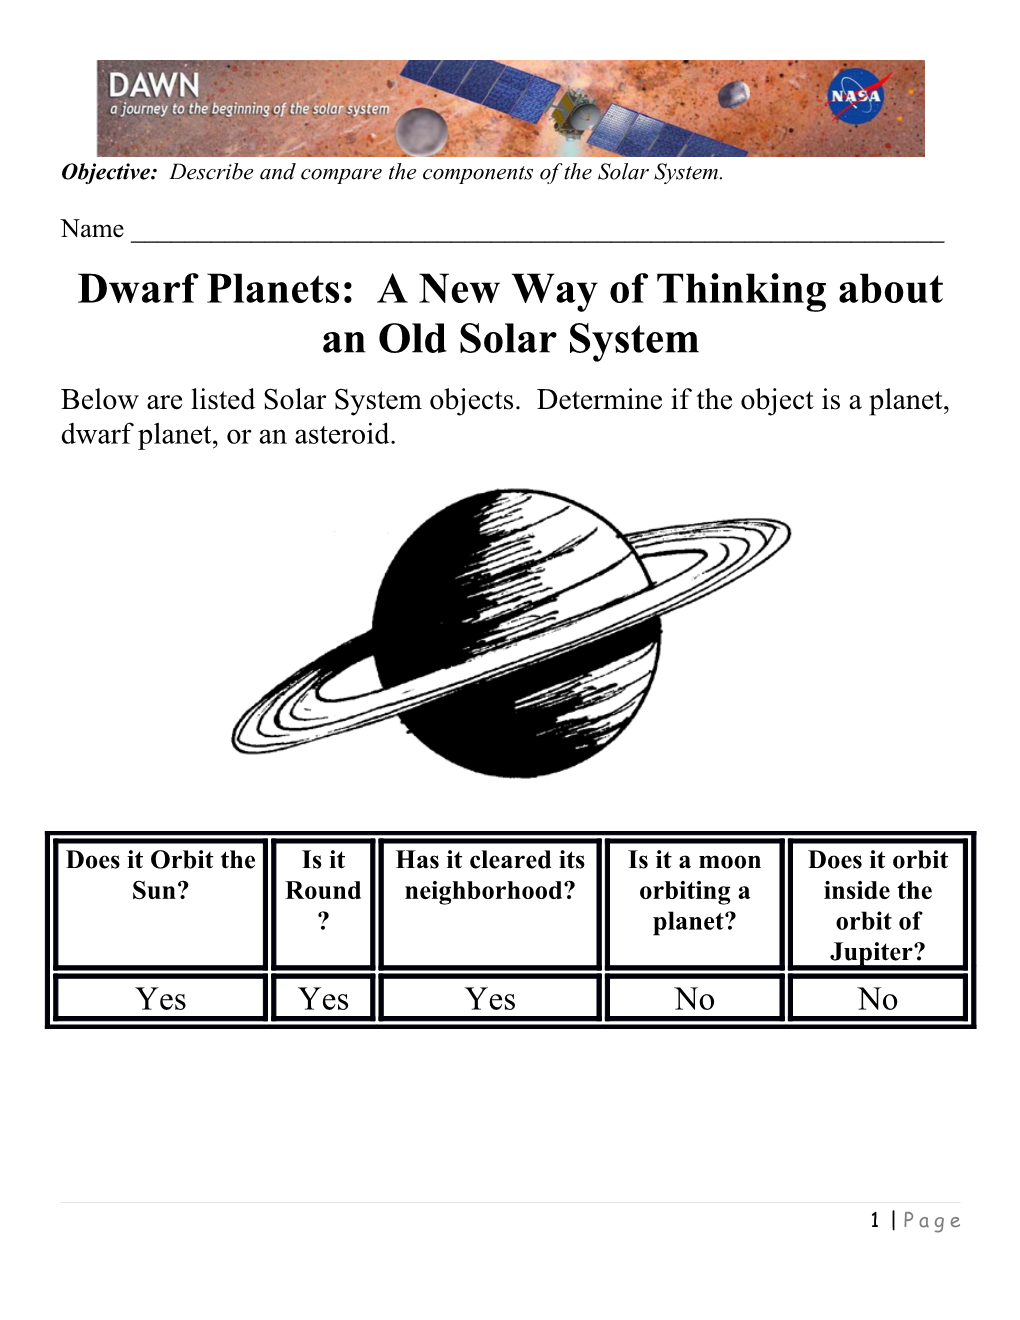 Dwarf Planets: a New Way of Thinking About an Old Solar System